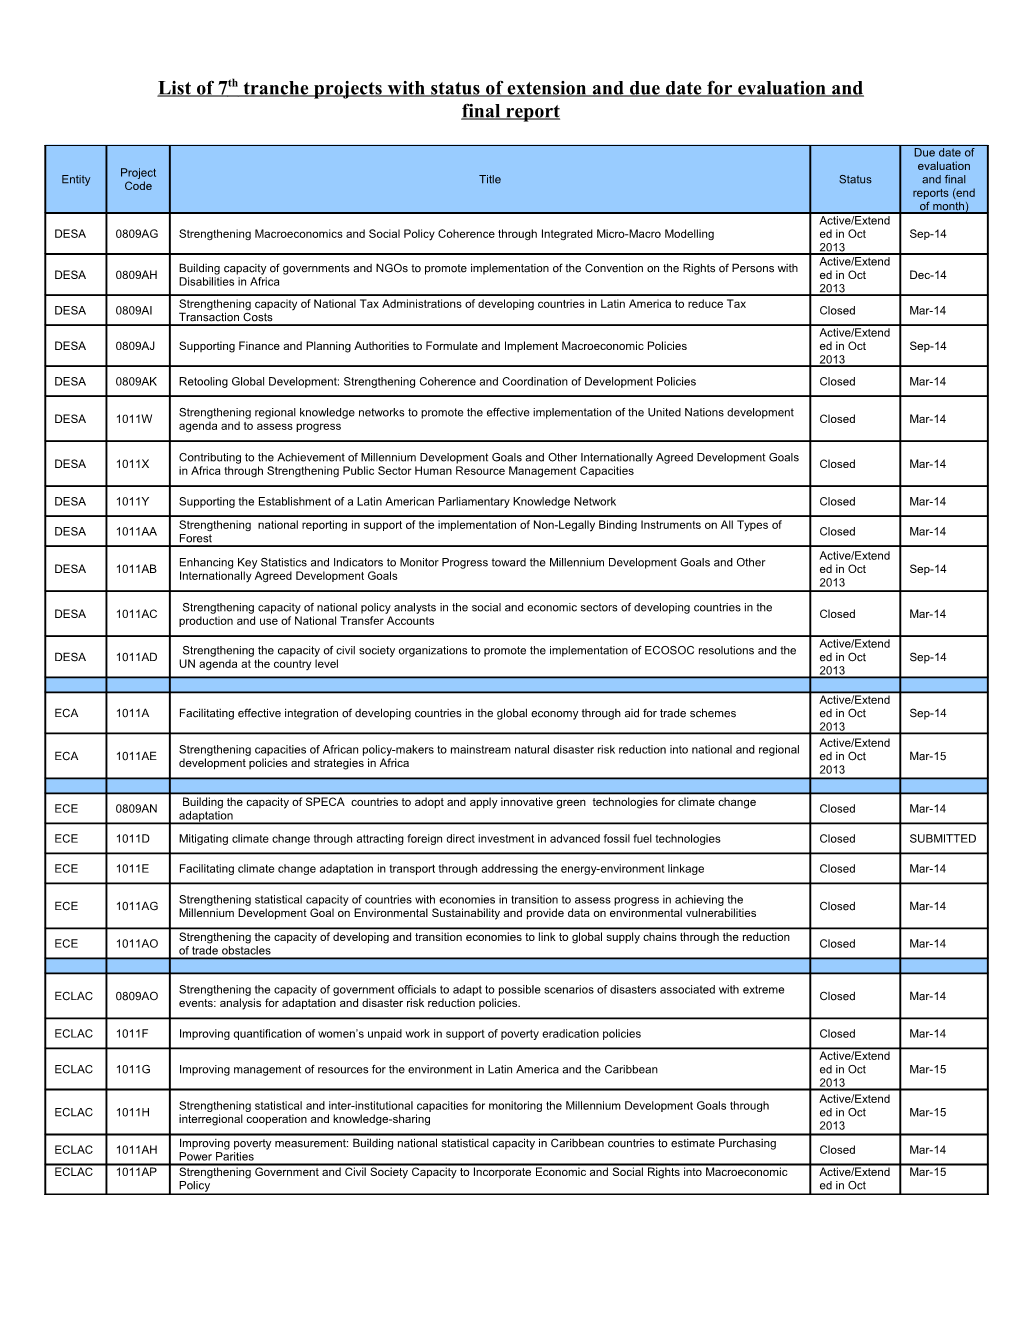 List of 7Th Tranche Projects with Status of Extension and Due Date for Evaluation and Final